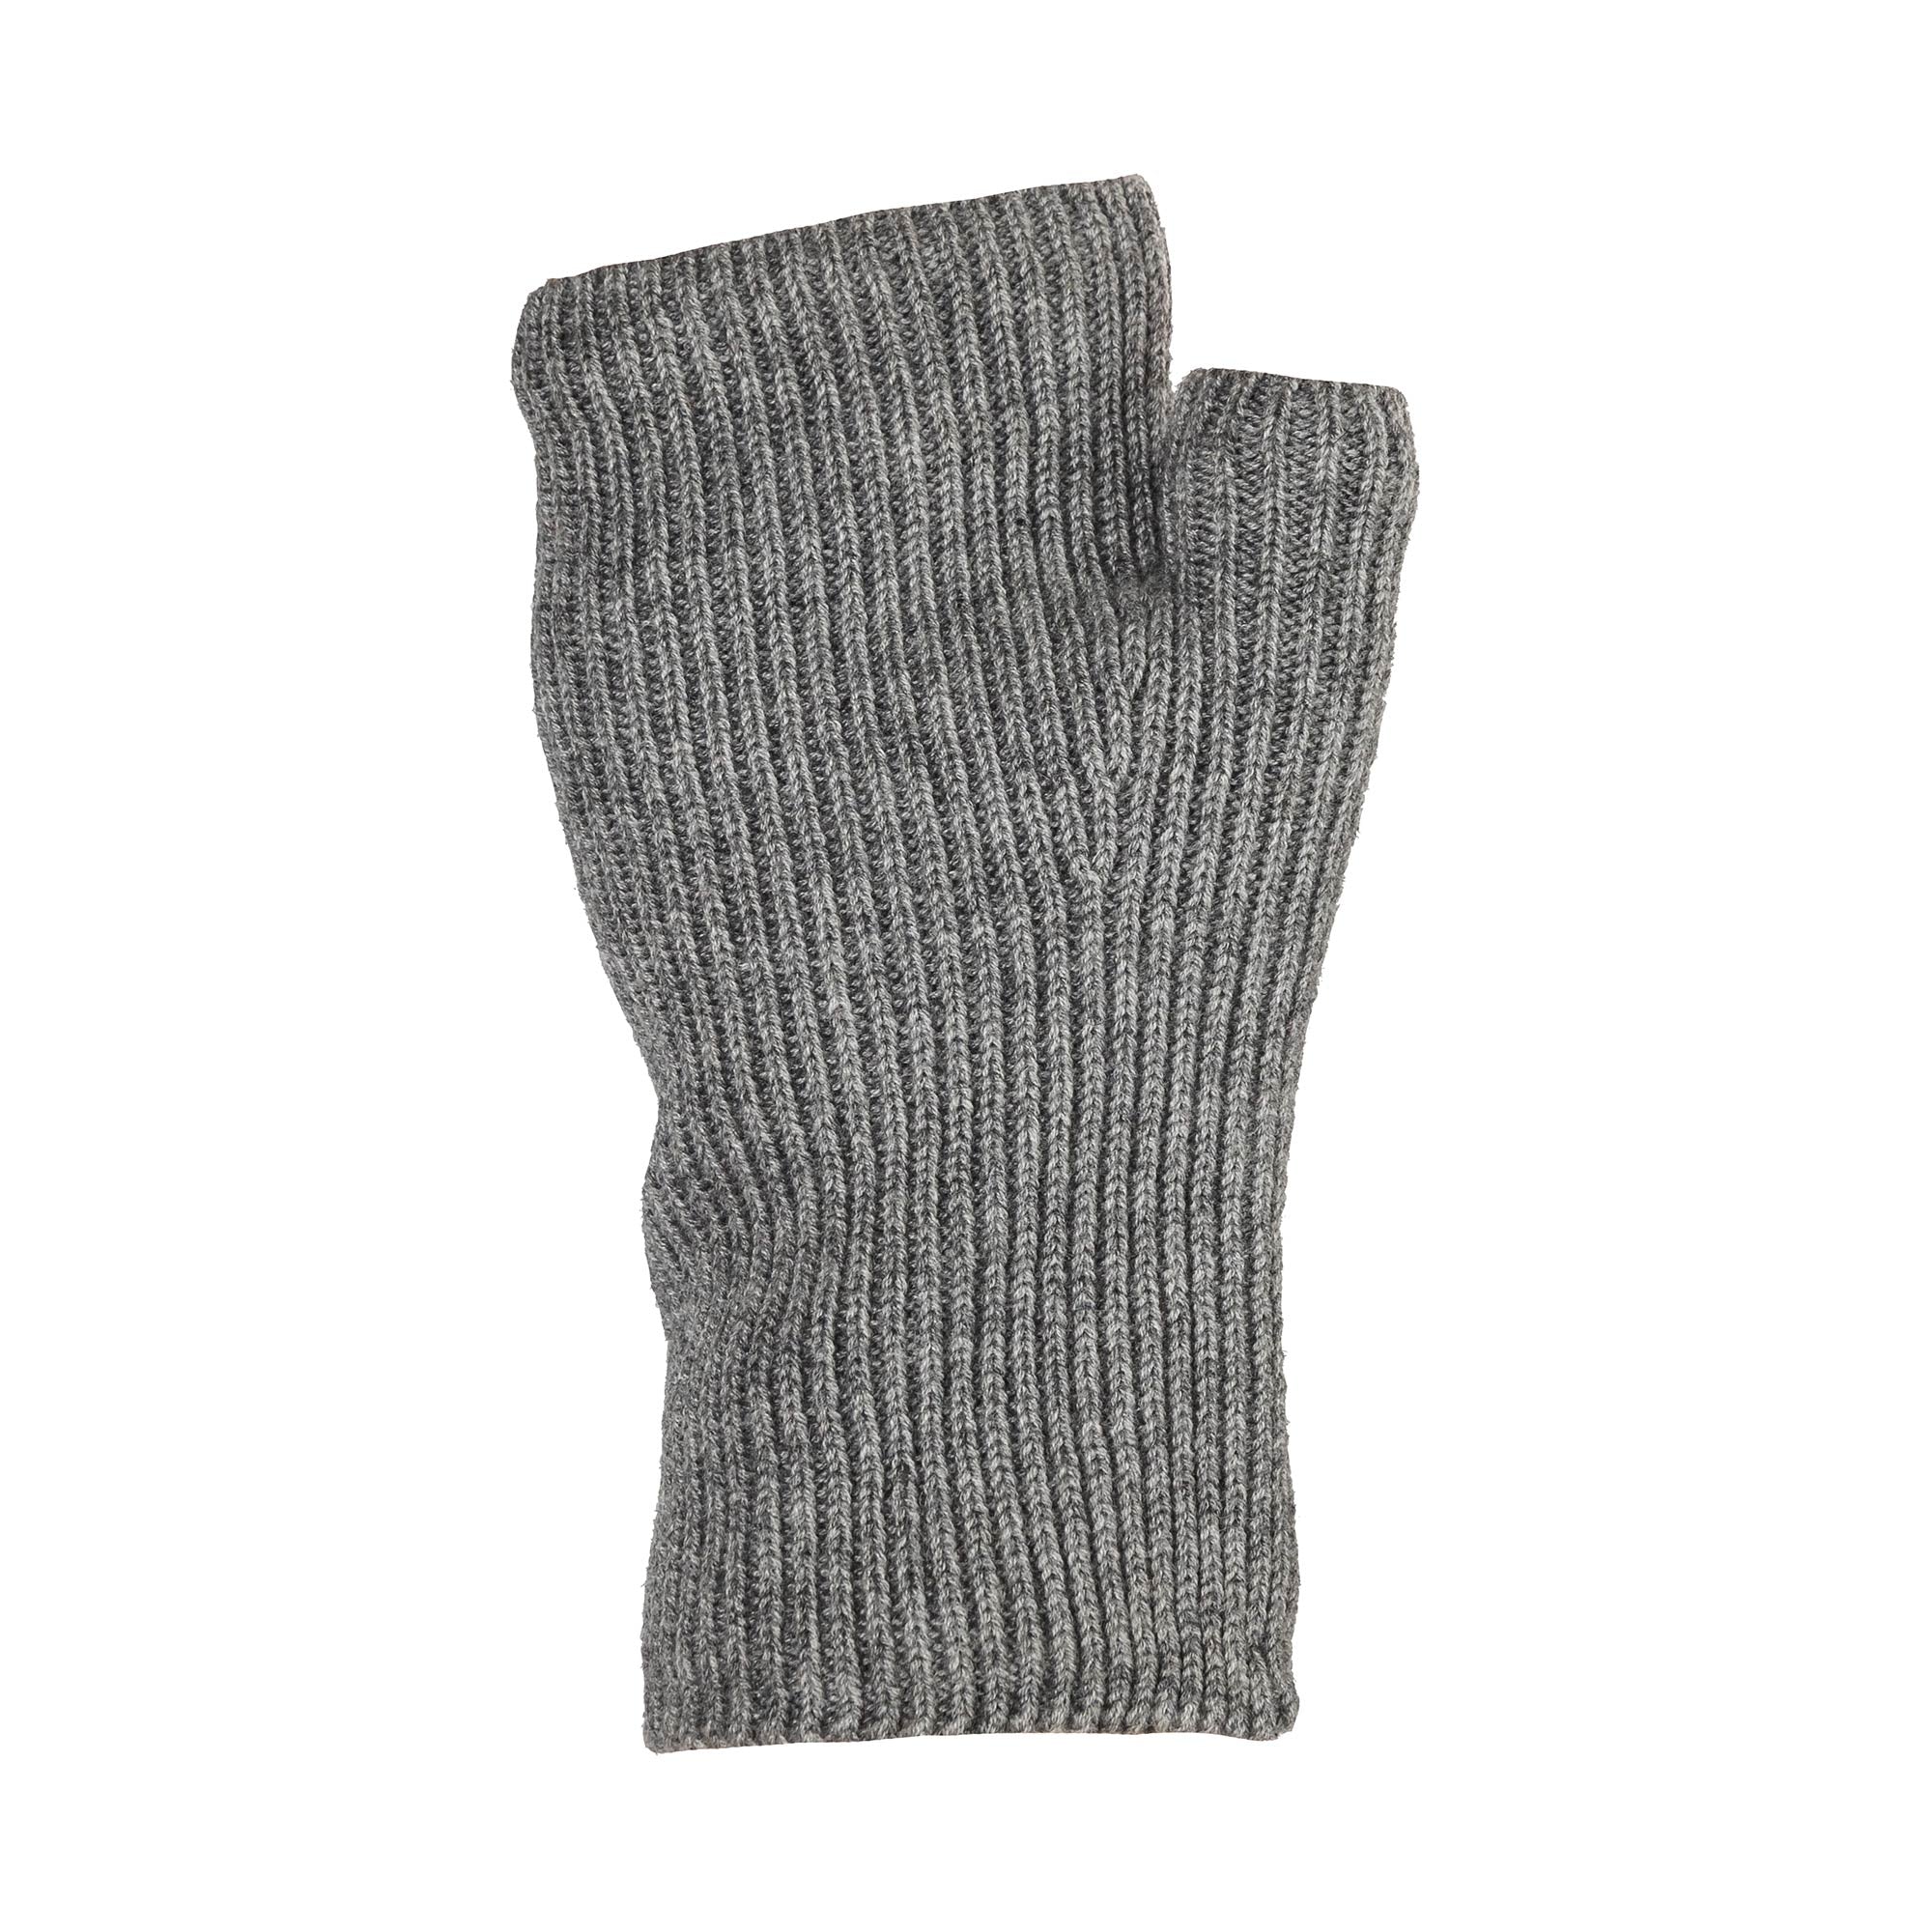 "Ash" knitted wrist gaiters